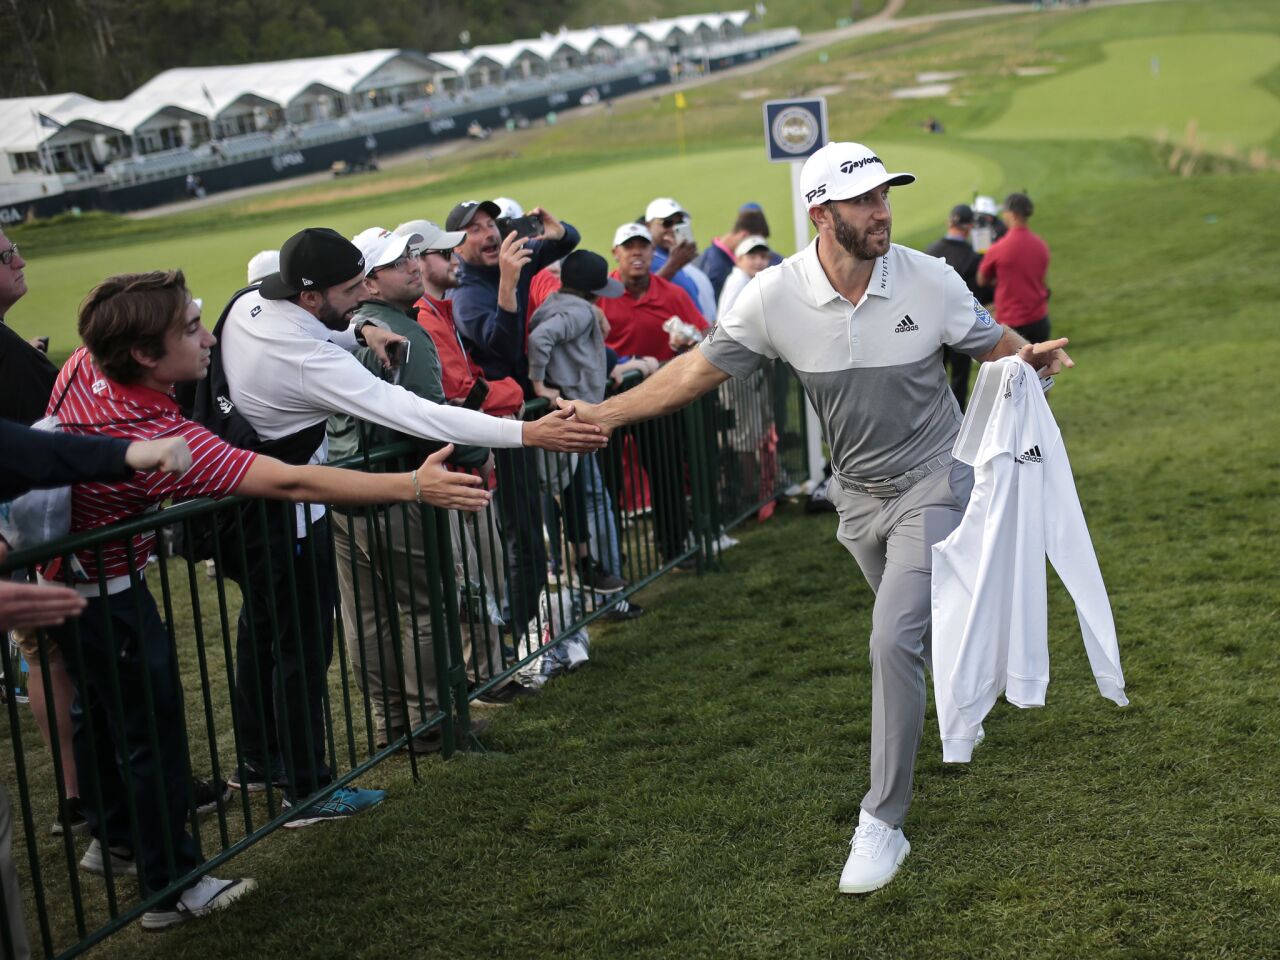 Dustin Johnson greets fans as he walks off the 18th green after finishing the first round of the PGA Championship at Bethpage Black in Farmingdale, N.Y.